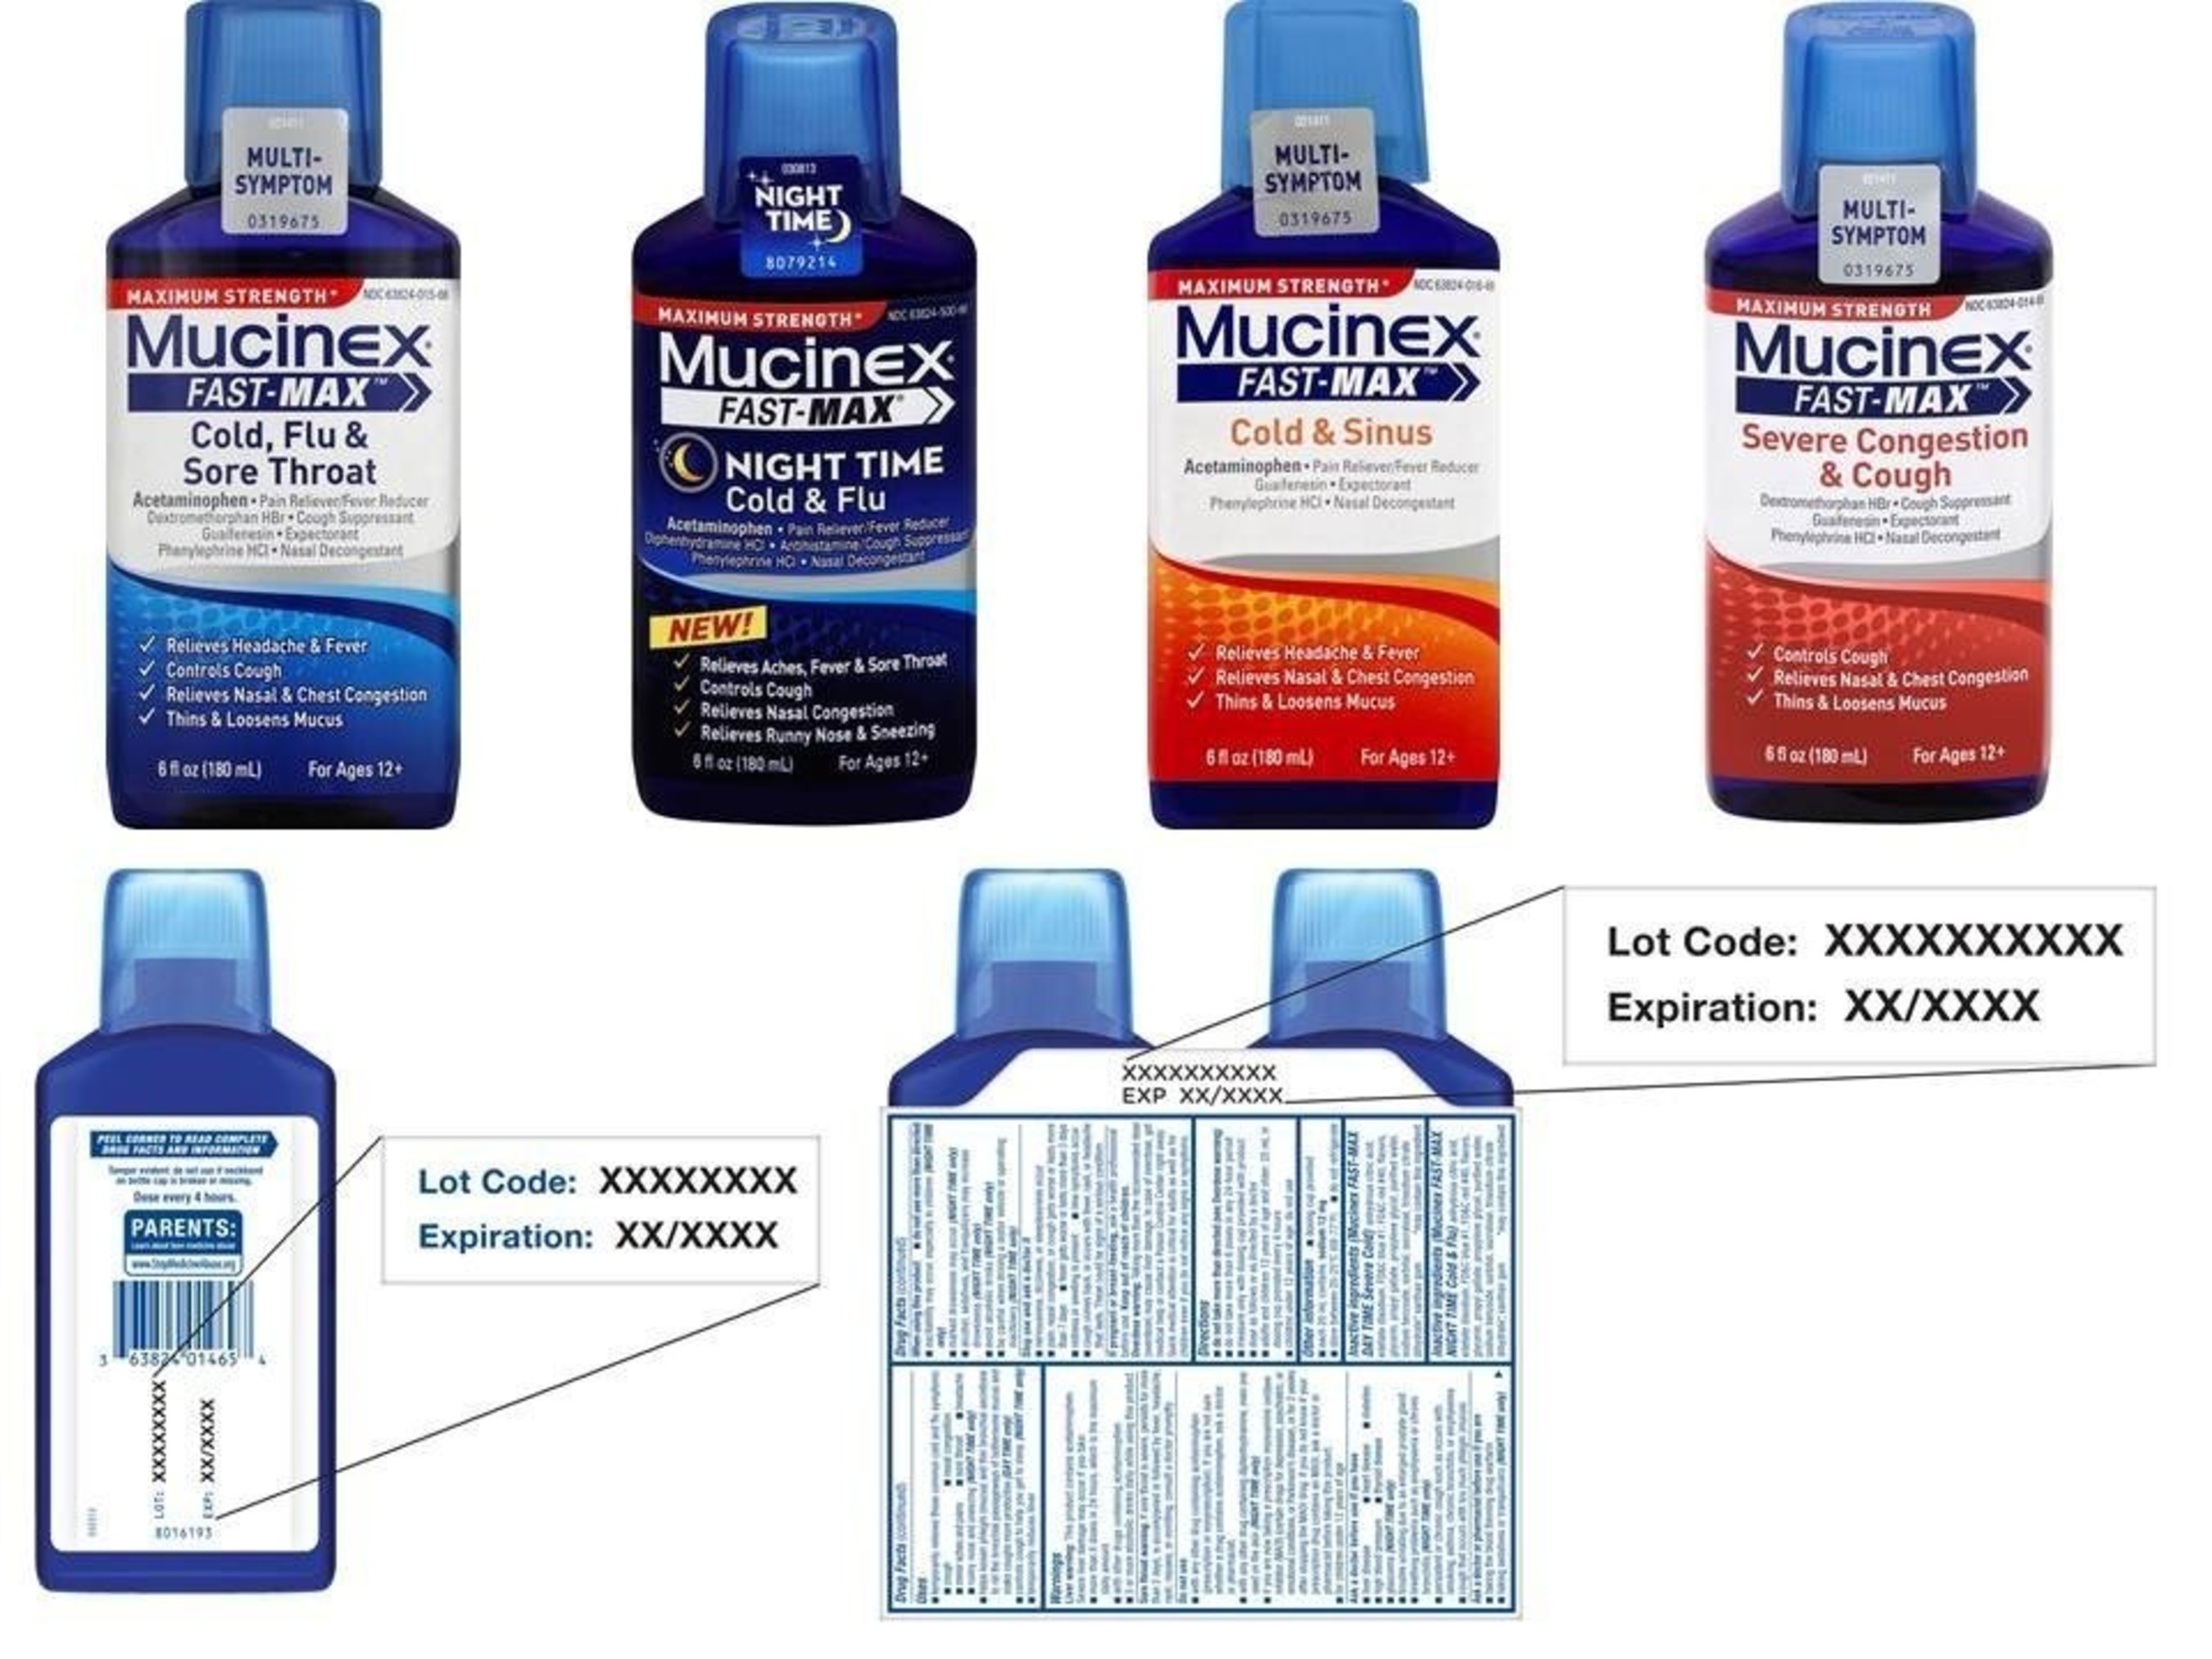 RB (formerly Reckitt Benckiser) has recalled certain lots of liquid bottles of MUCINEX(R) FAST-MAX(R) Night Time Cold & Flu; MUCINEX(R) FAST-MAX(R) Cold & Sinus; MUCINEX(R) FAST-MAX(R) Severe Congestion & Cough and MUCINEX(R) FAST-MAX(R) Cold, Flu & Sore Throat because the over-the-counter medications, which correctly label the product on the front of the bottle and lists all active ingredients, may not have the correct corresponding drug facts label on the back.